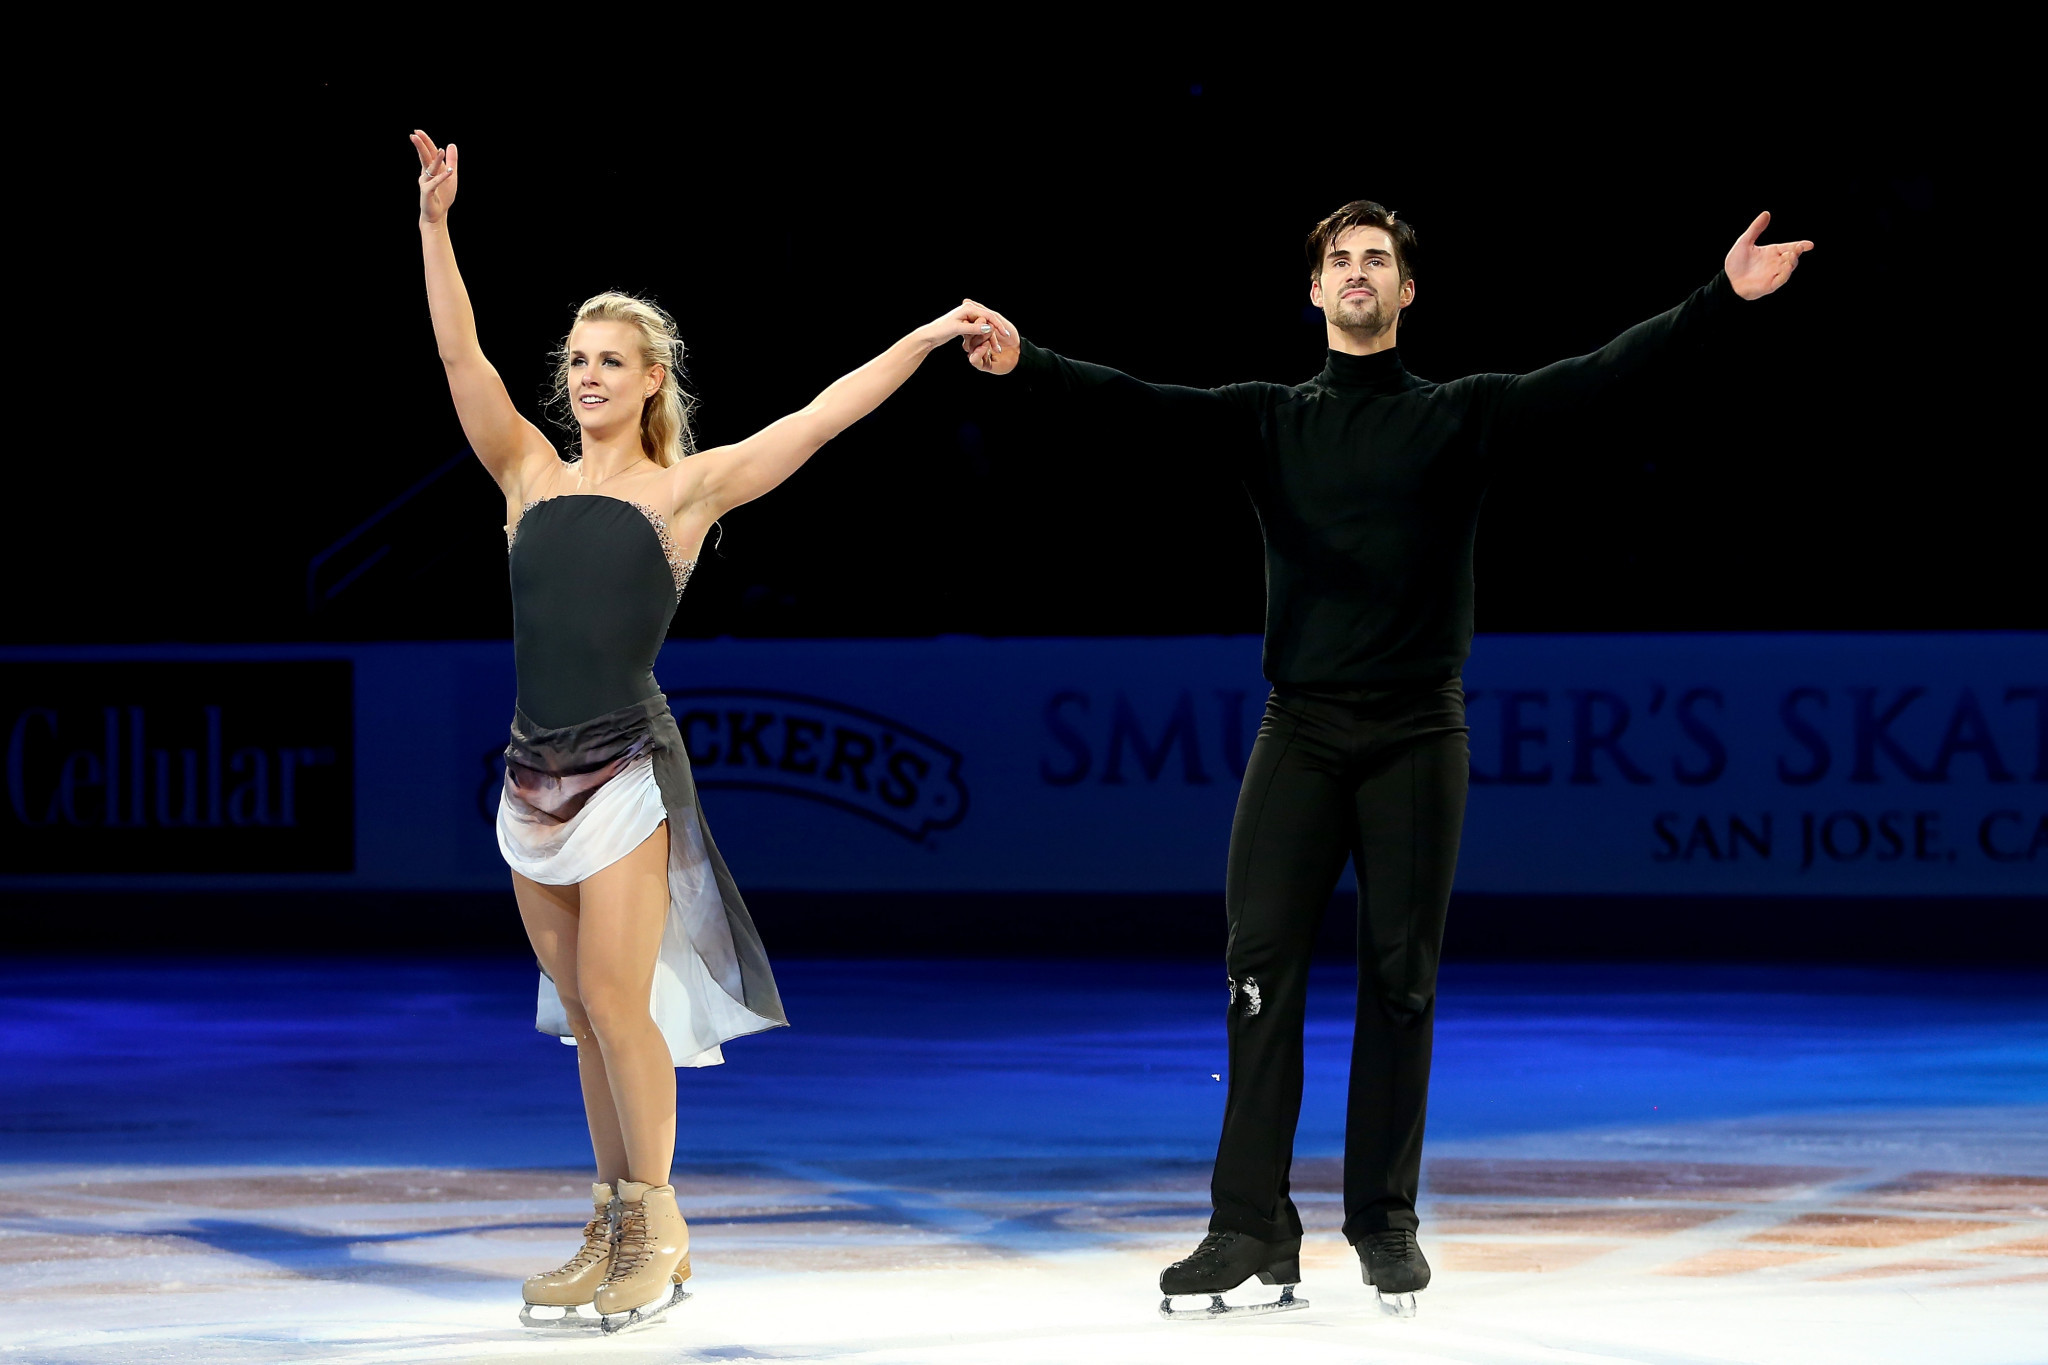 Madison Hubbell and Zachary Donohue are among the ice dance teams ©Getty Images